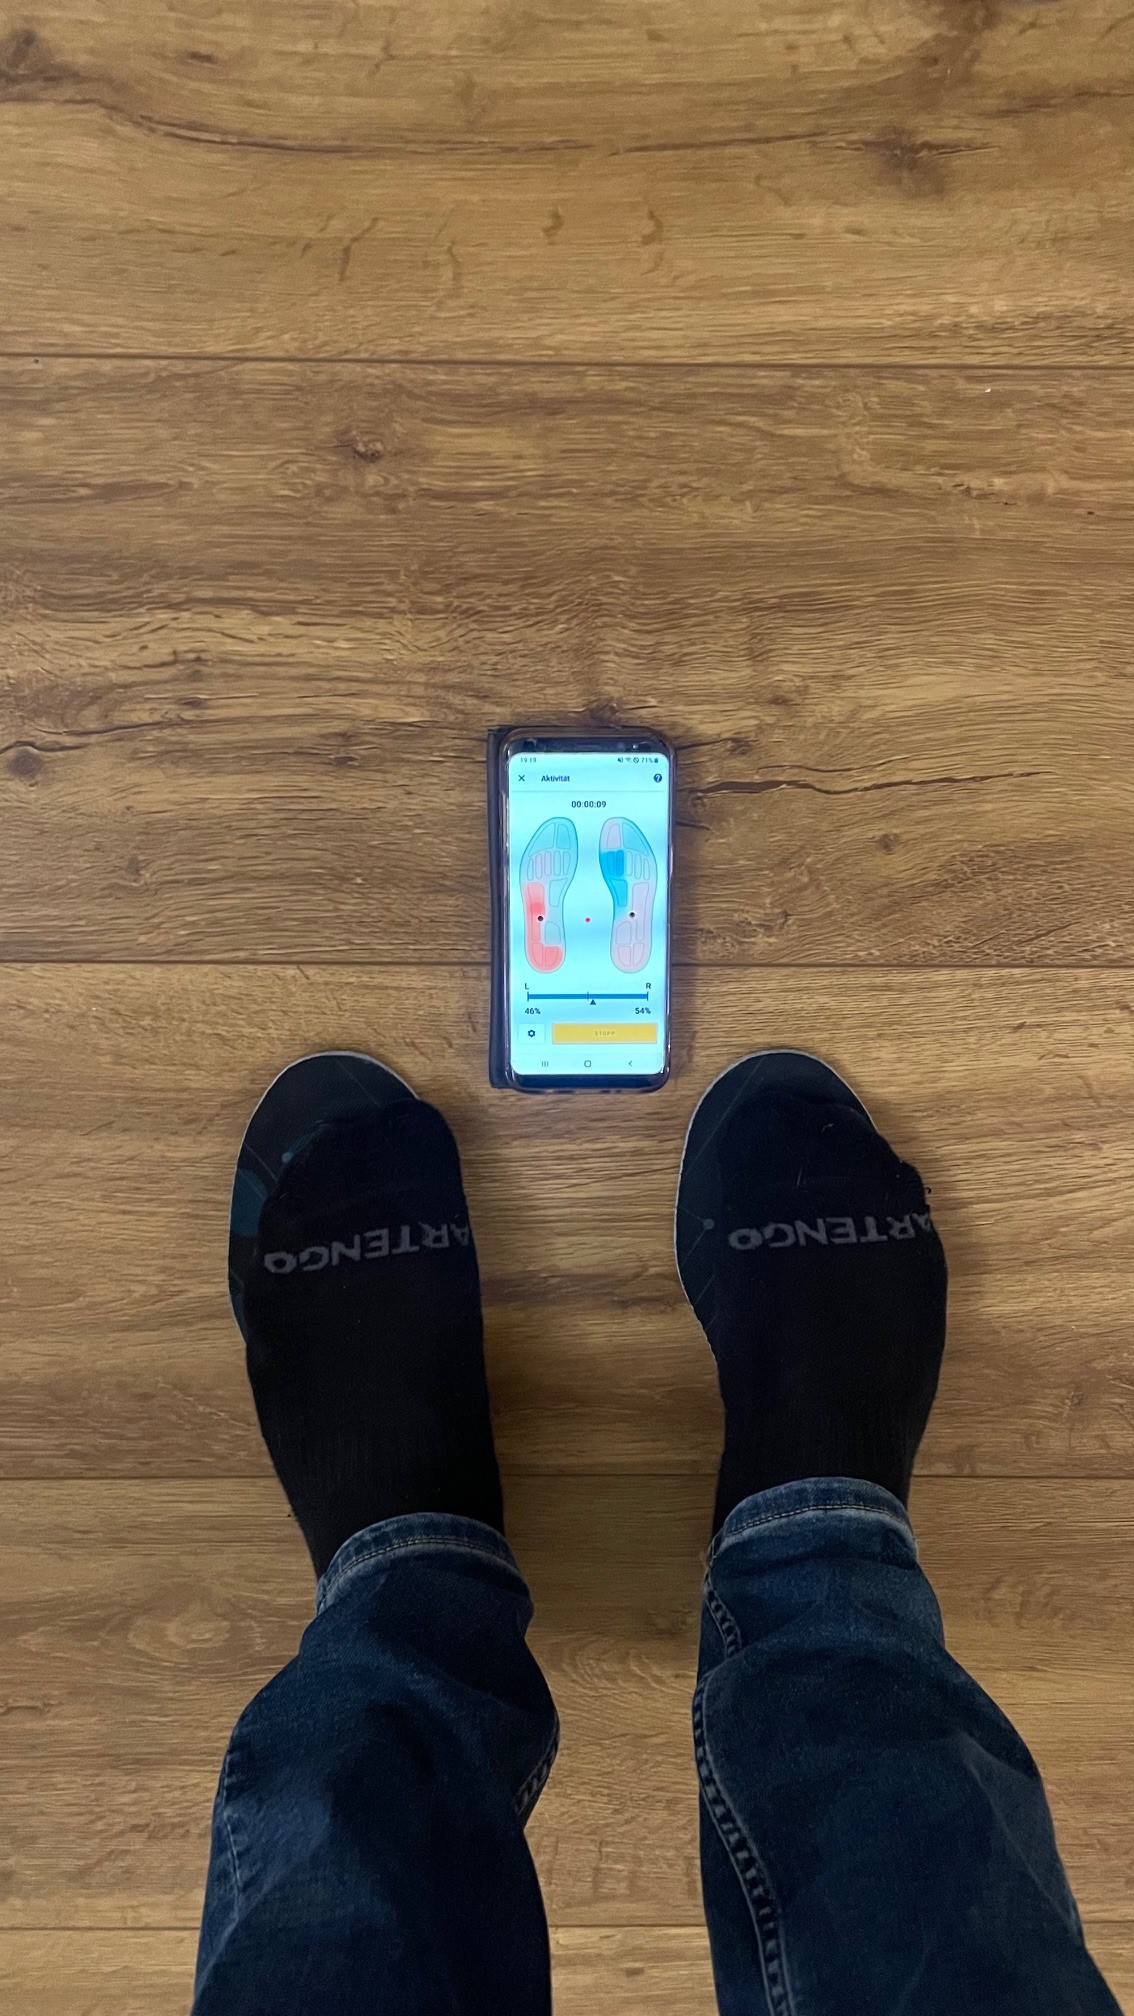 Insoles for Self-Training in Scoliosis